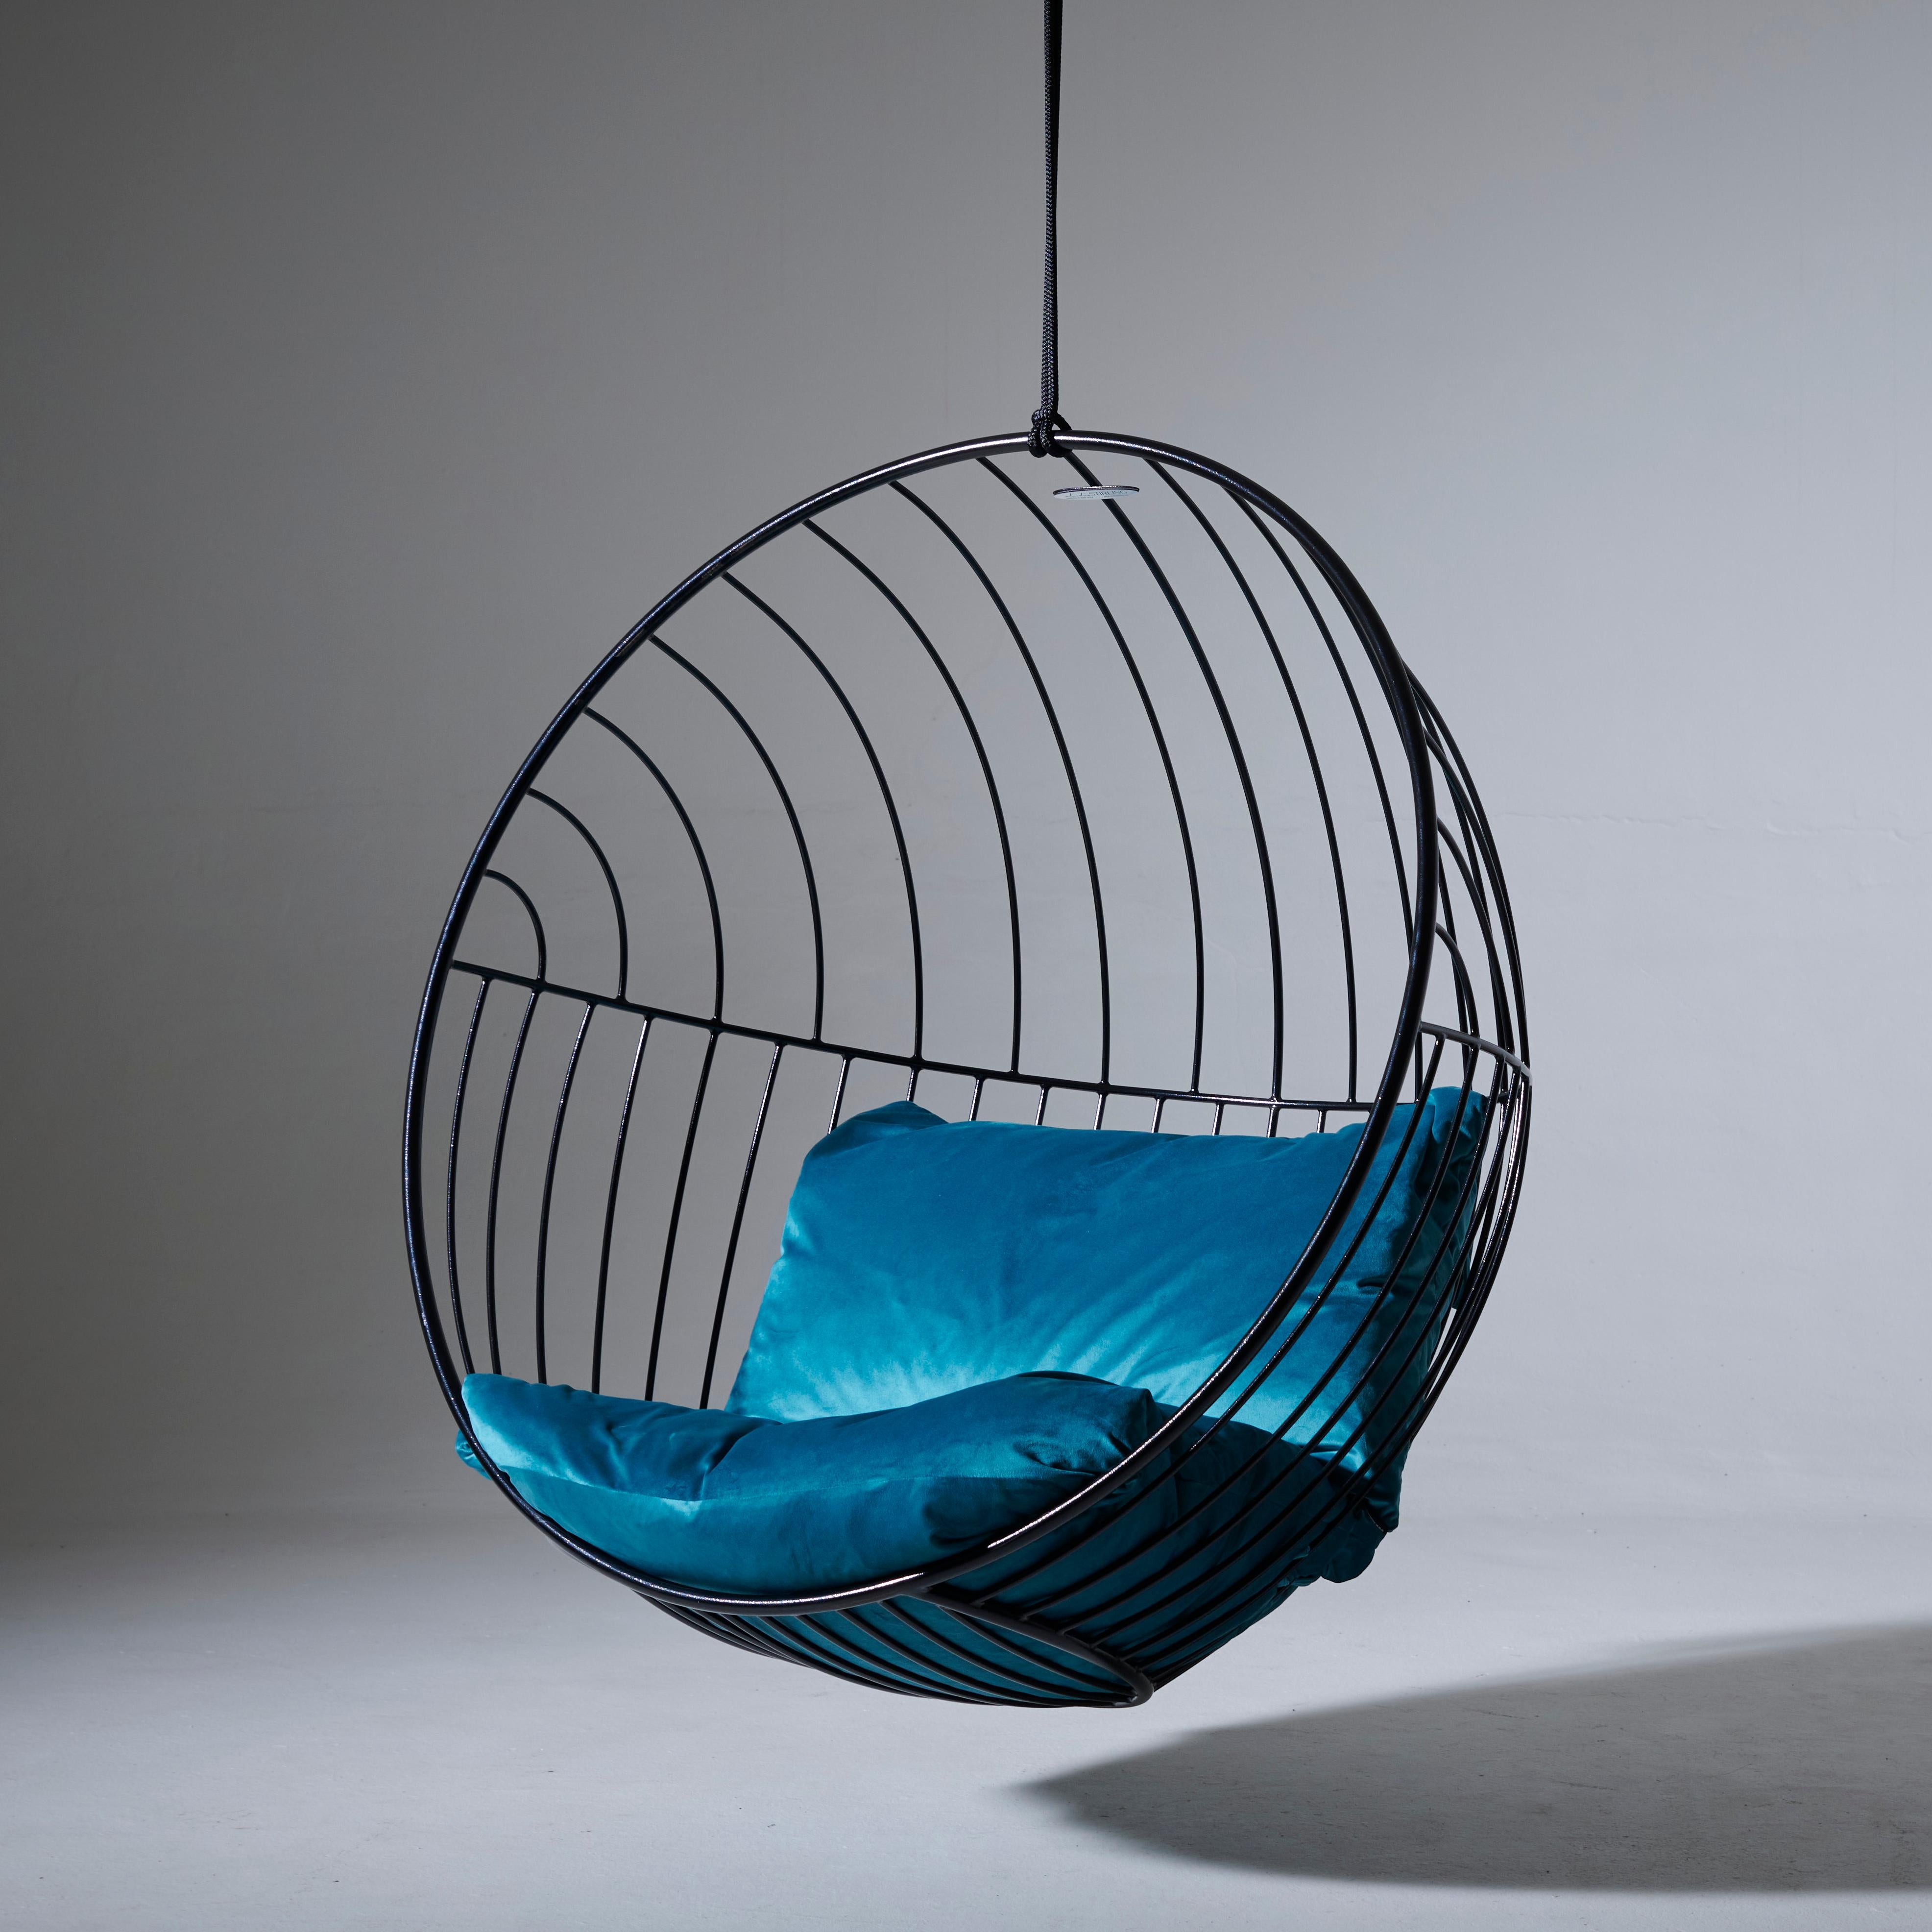 The Bubble hanging chair swing seat's round shape creates a cozy feel. The modern patterns are striking in its visual appeal.

The chair has been designed to be very comfortable and relaxing. It is ideal for landscaping, contract, public space,